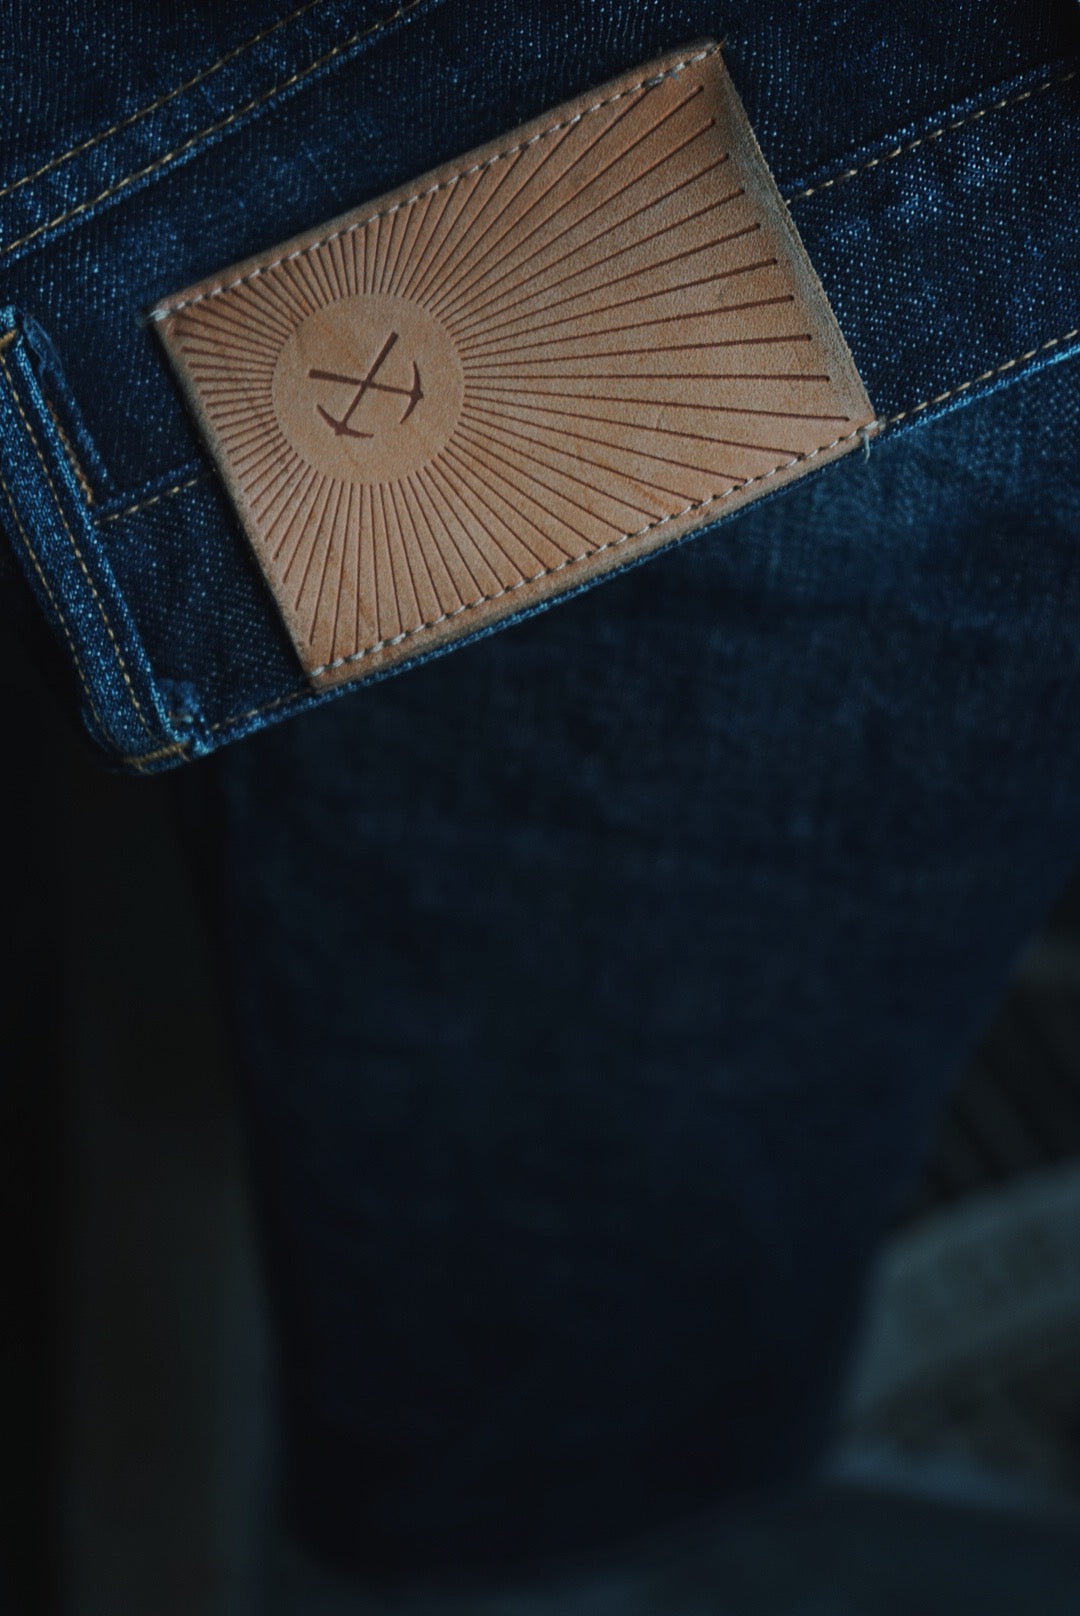 Close up view of leather patch on jean.